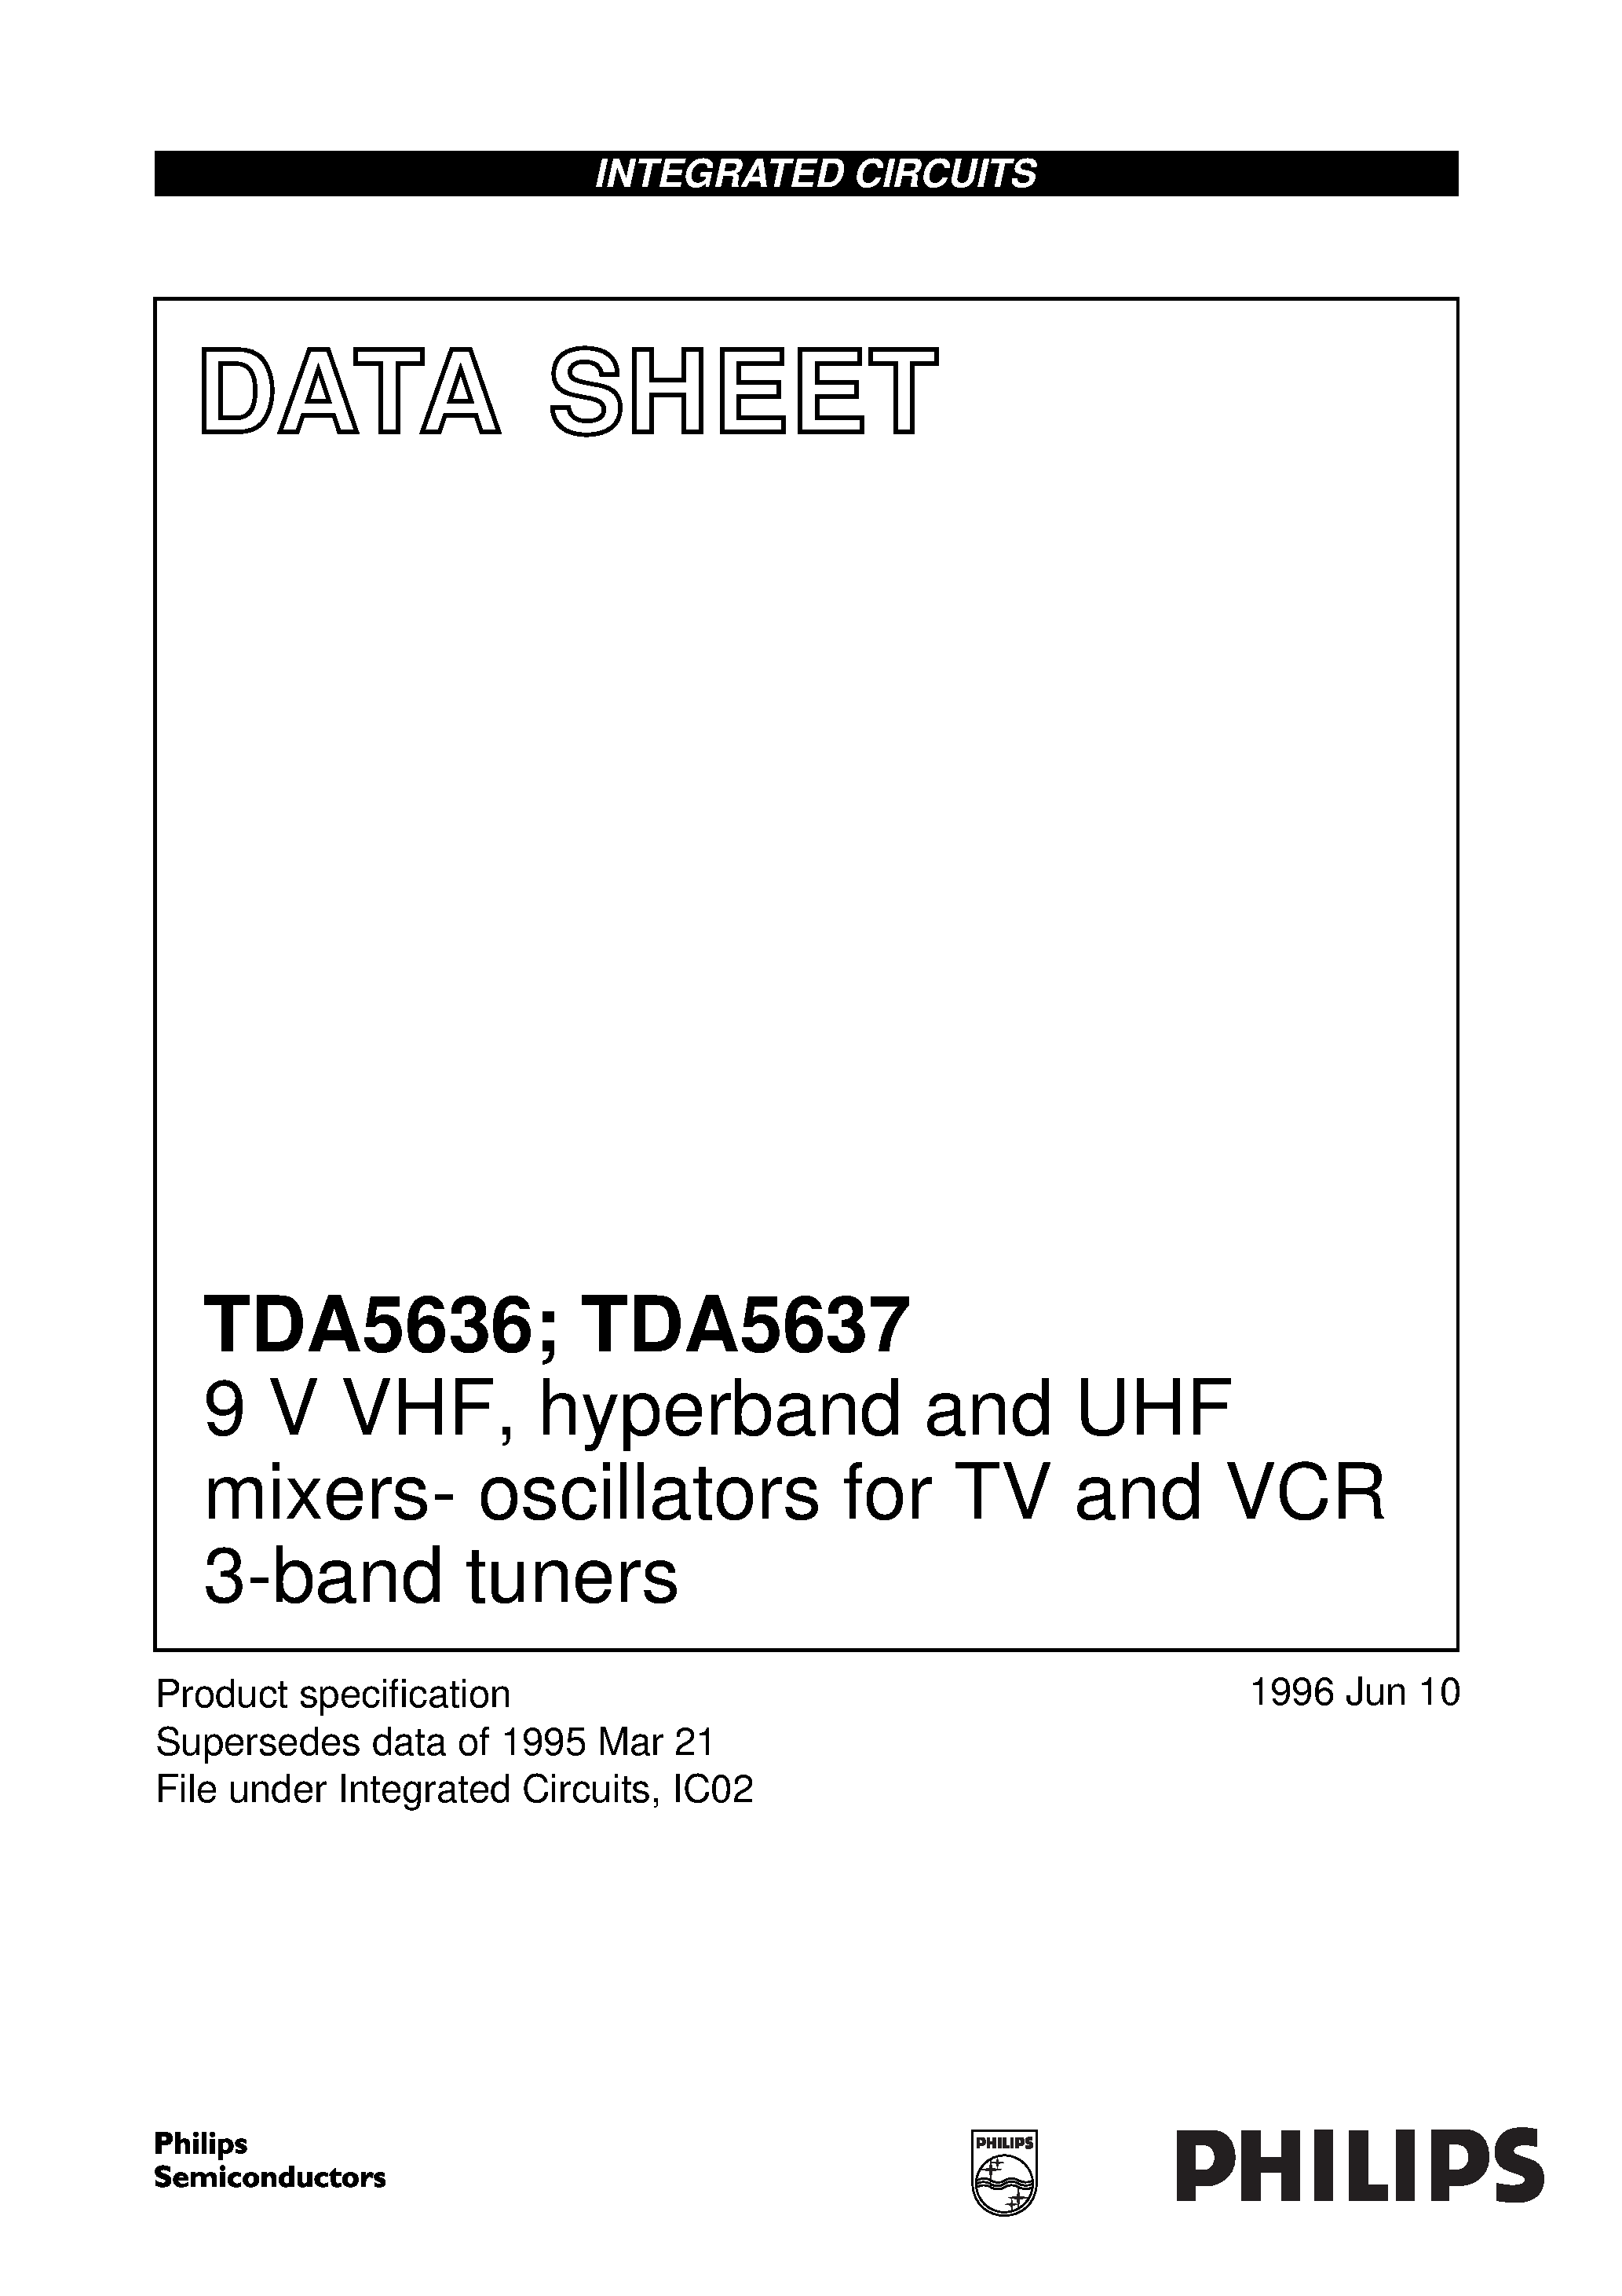 Datasheet TDA5637M - 9 V VHF/ hyperband and UHF mixers- oscillators for TV and VCR 3-band tuners page 1